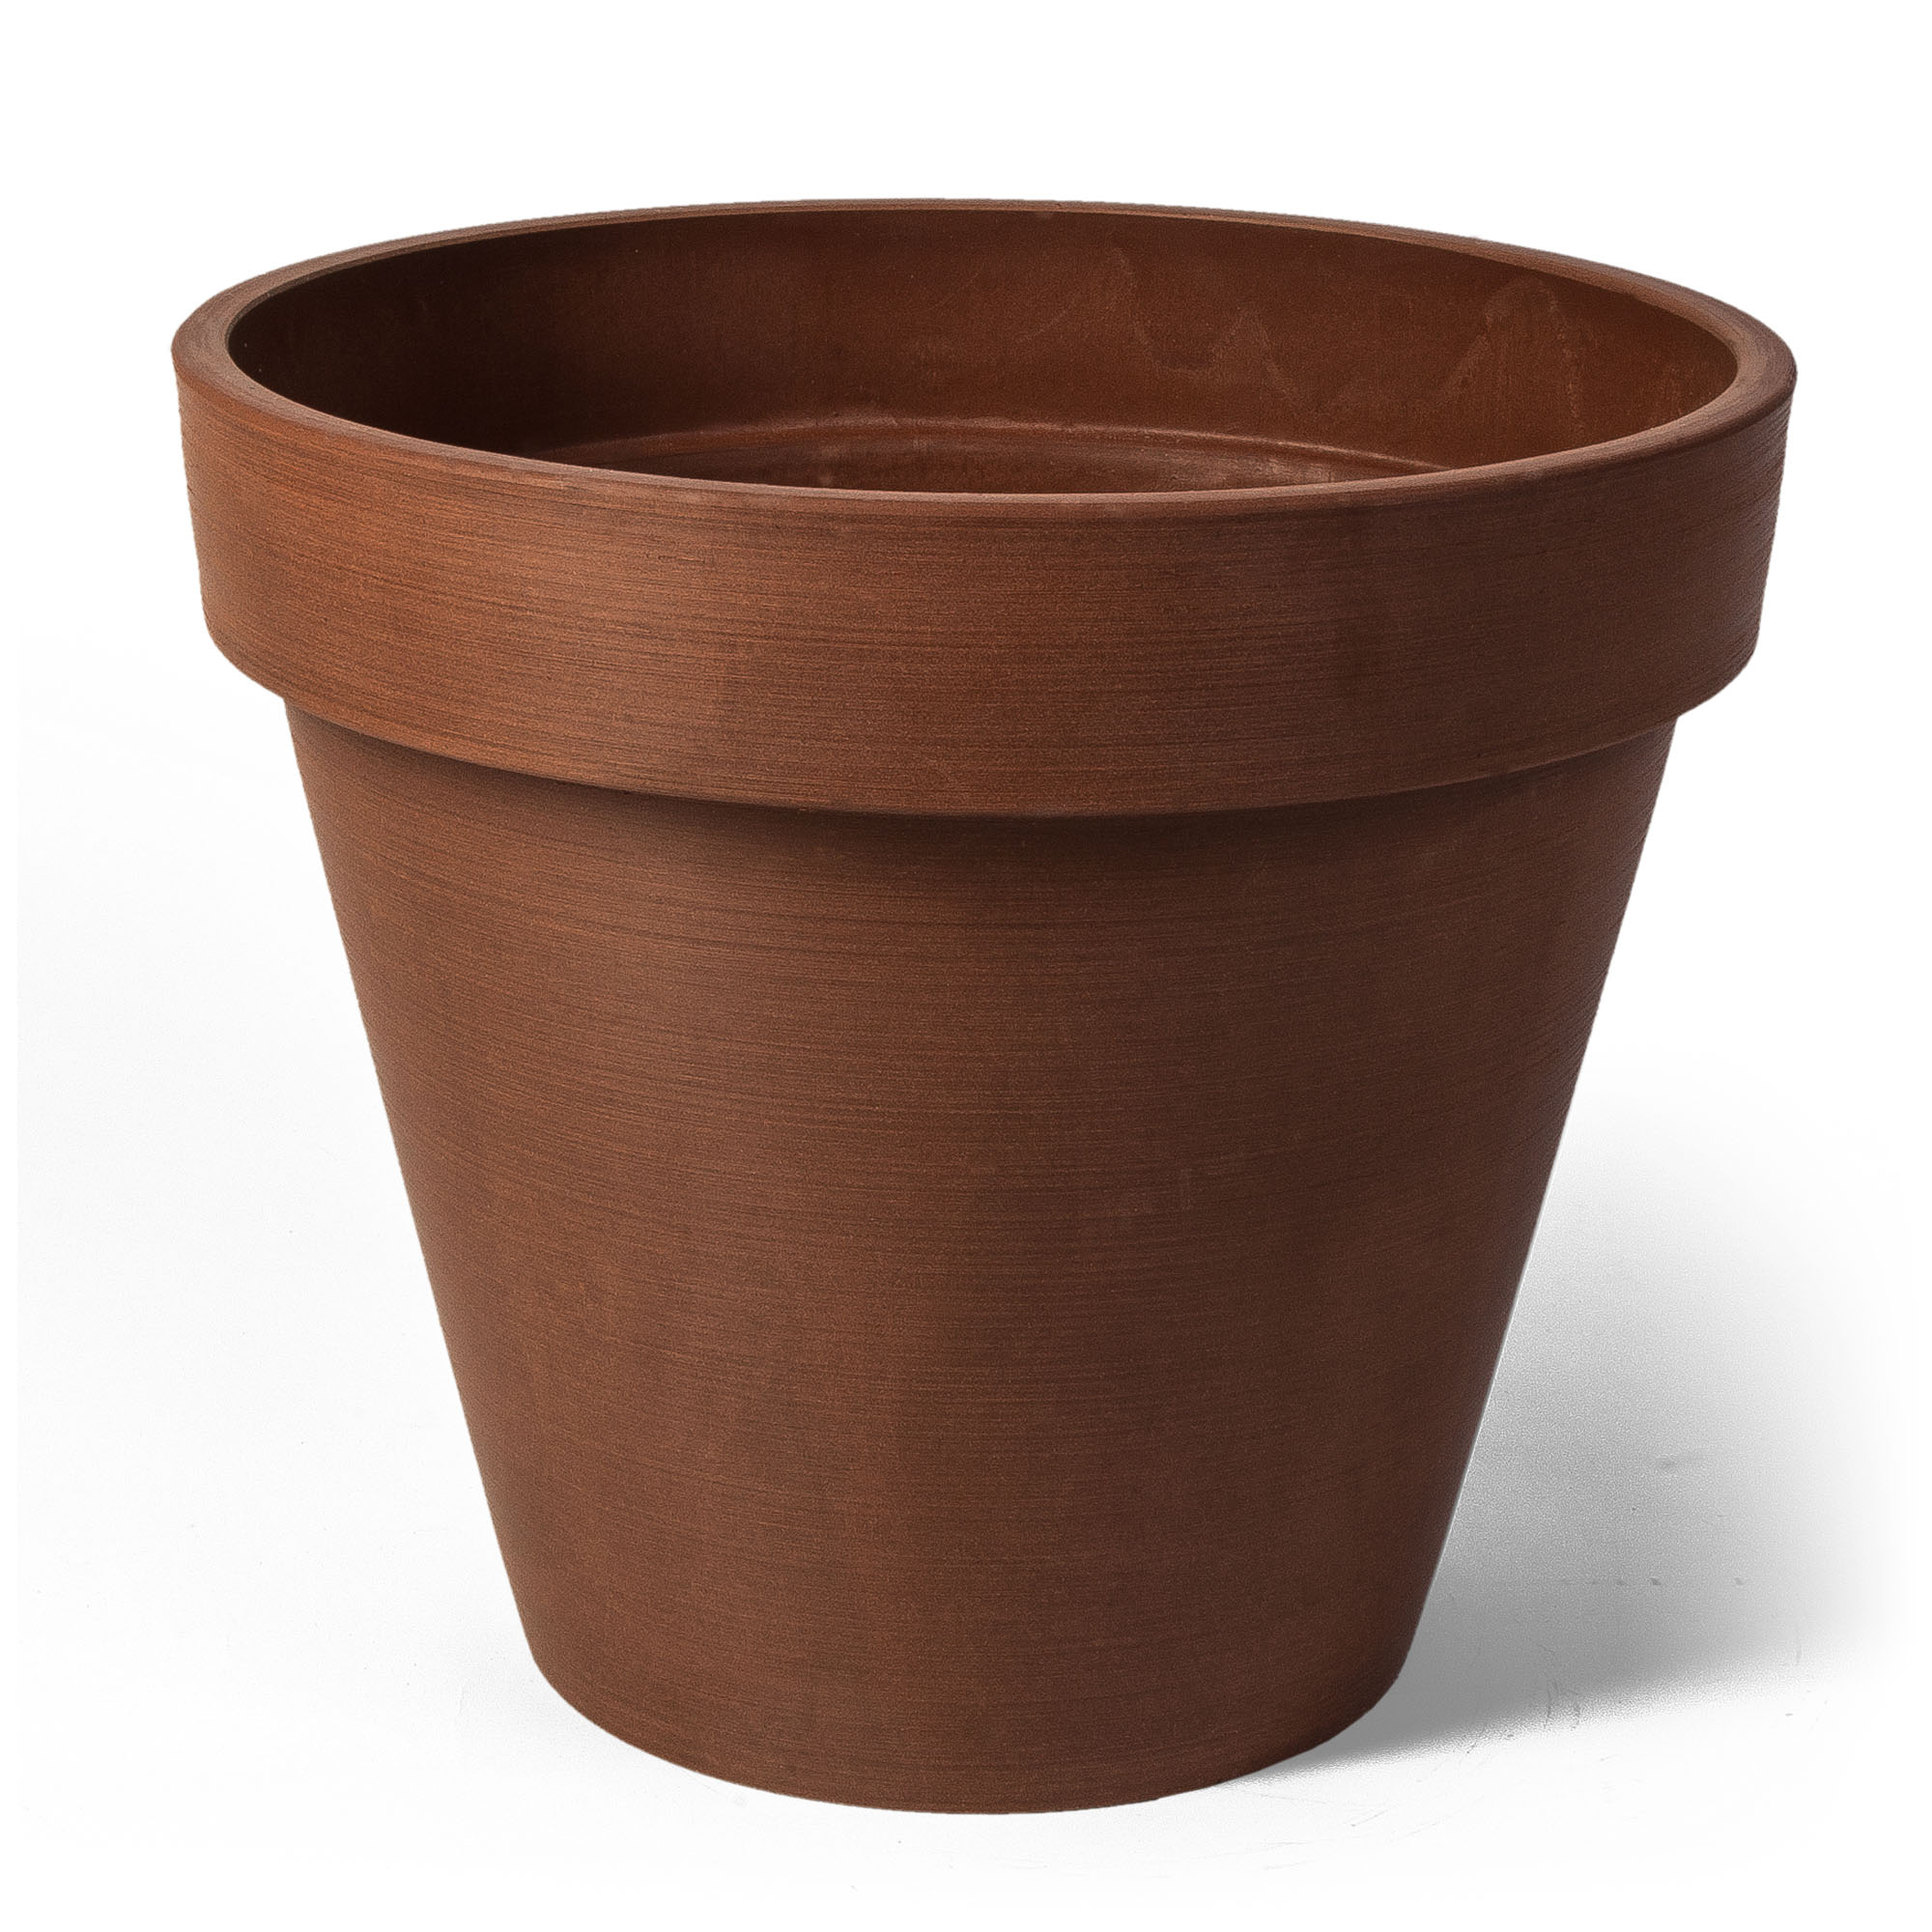 Algreen Products Valencia Round Banded 19.75D x 15.75 Planter